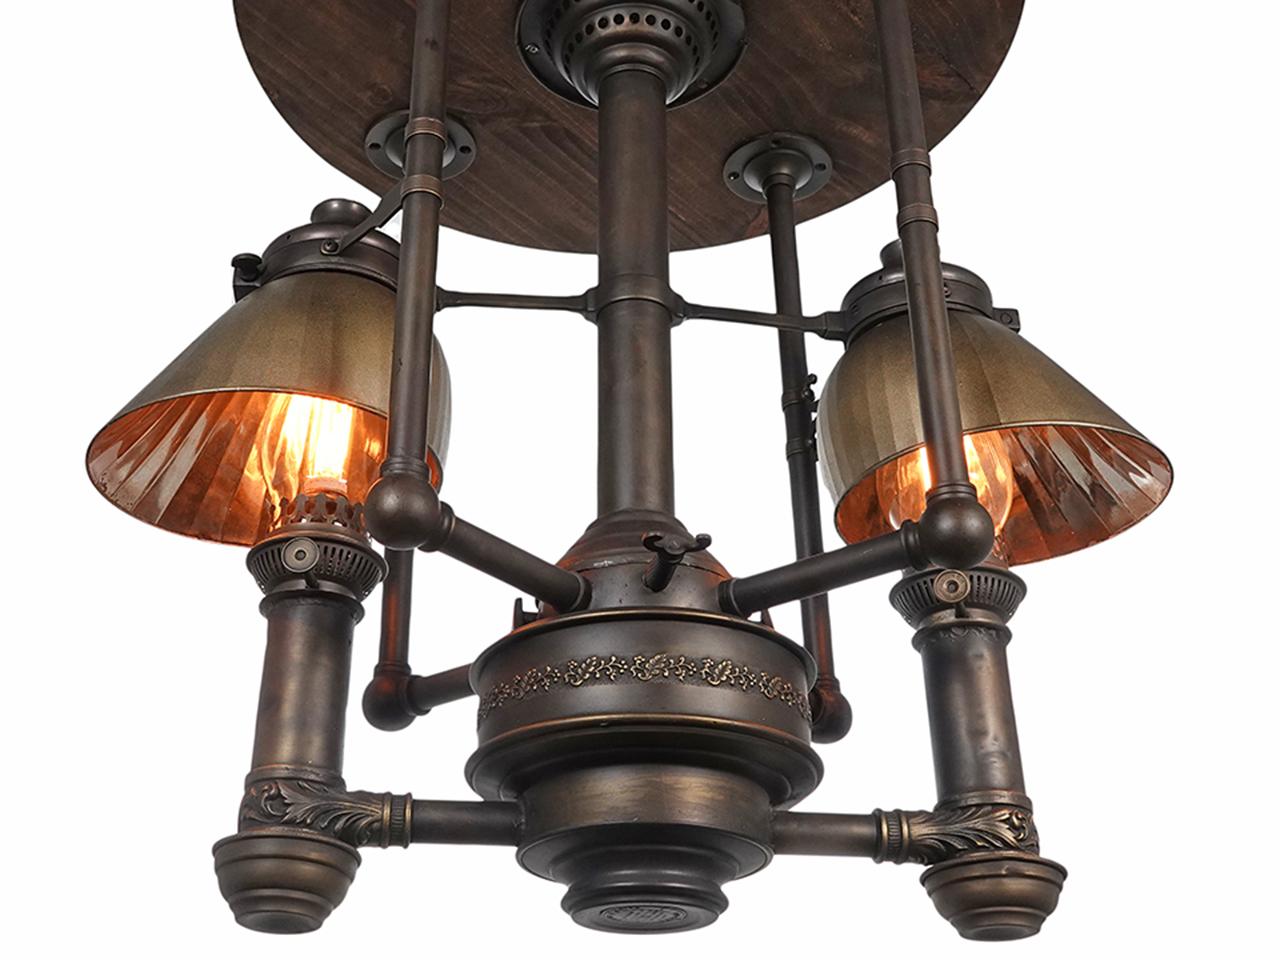 It's rare when you have the chance to purchase objects from an individual's lifelong collection. The depth of knowledge and network of this important collector/expert can't be duplicated. We had the opportunity to see these lamps first-hand and